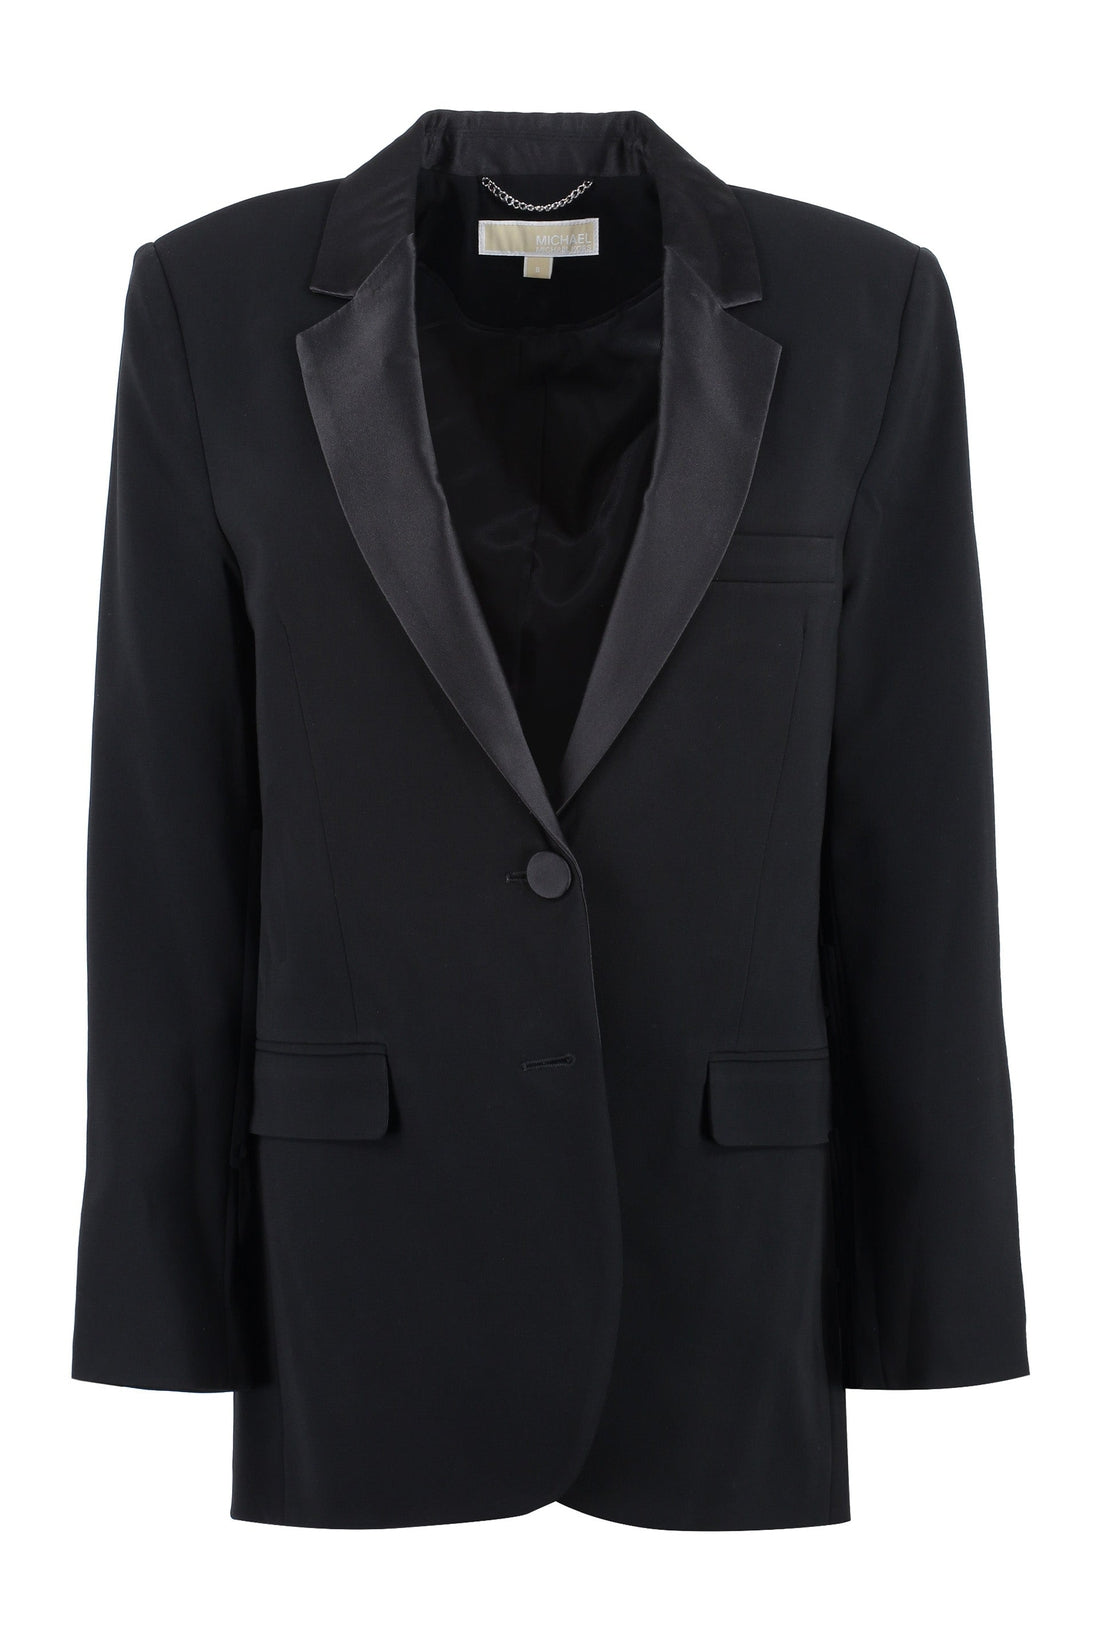 MICHAEL MICHAEL KORS-OUTLET-SALE-Single-breasted two-button blazer-ARCHIVIST